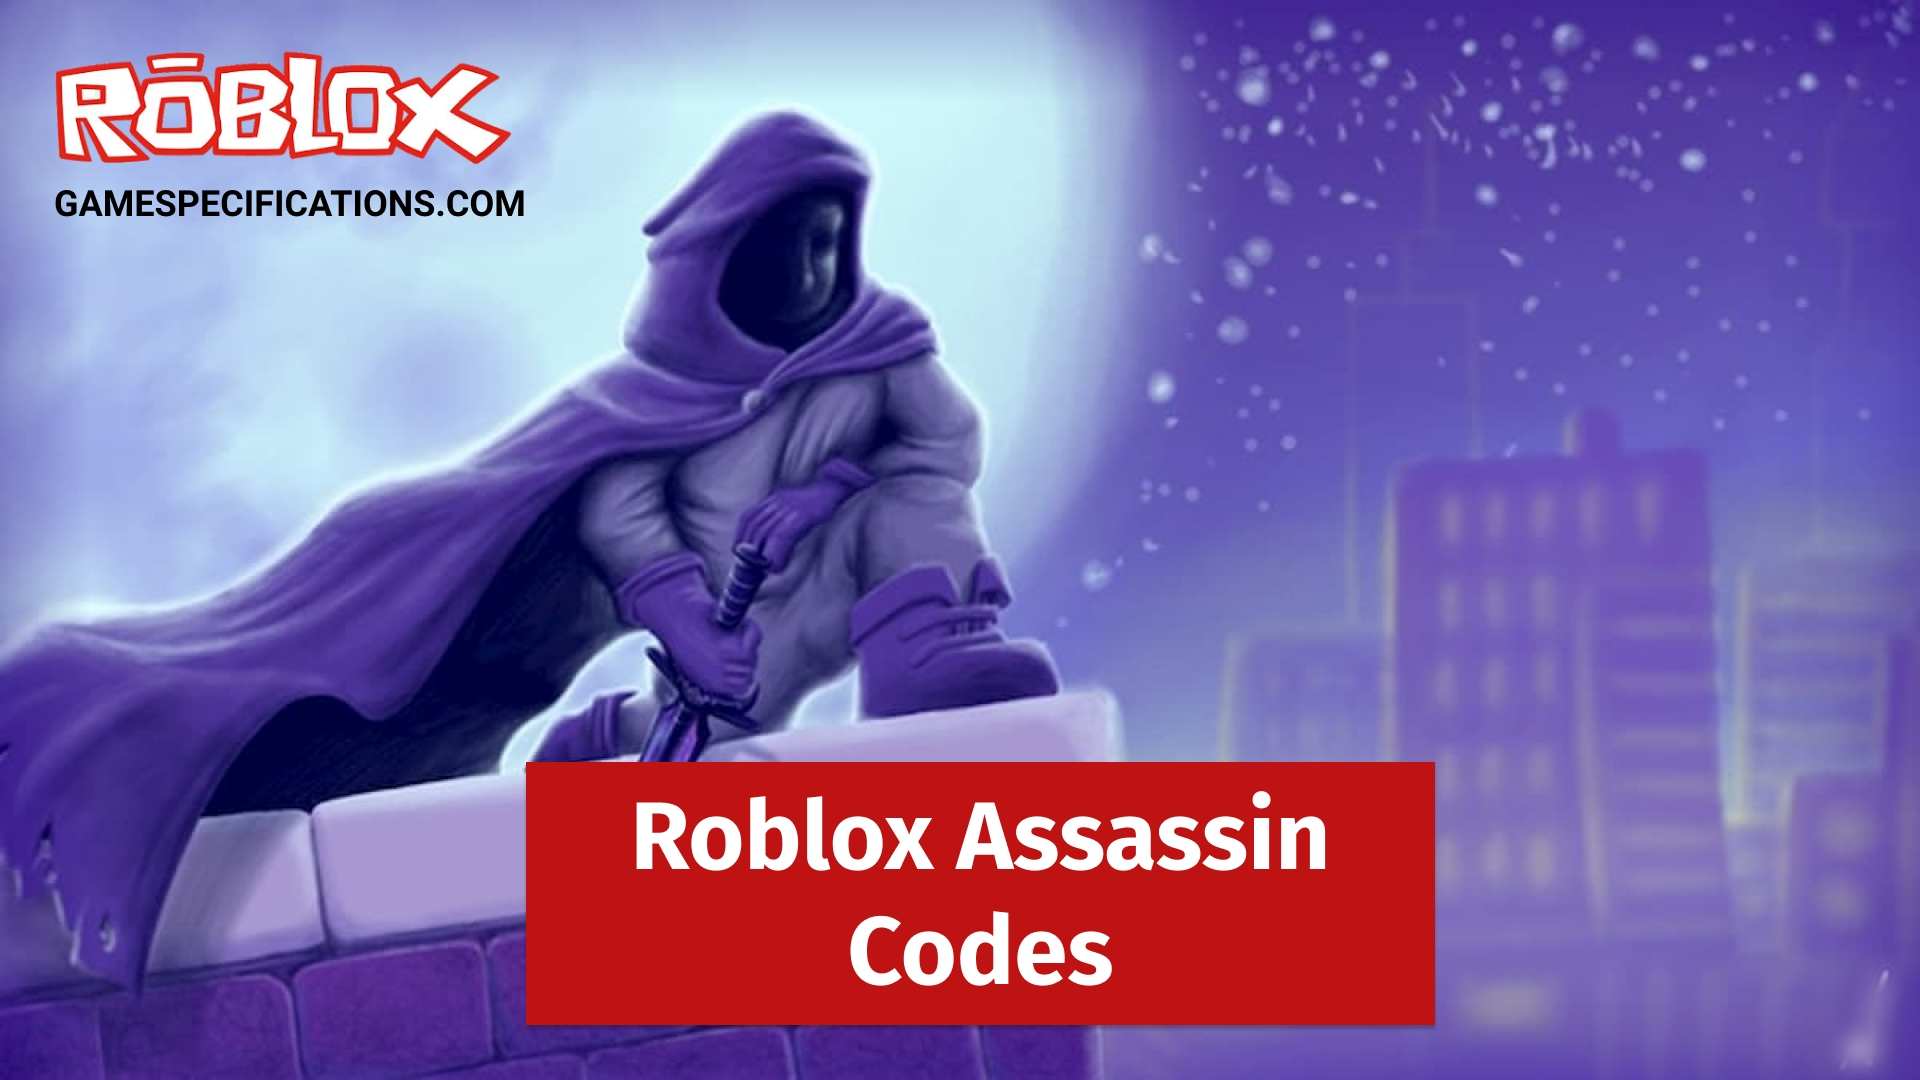 Roblox Assassin Codes July 2021 Game Specifications - merely roblox codes